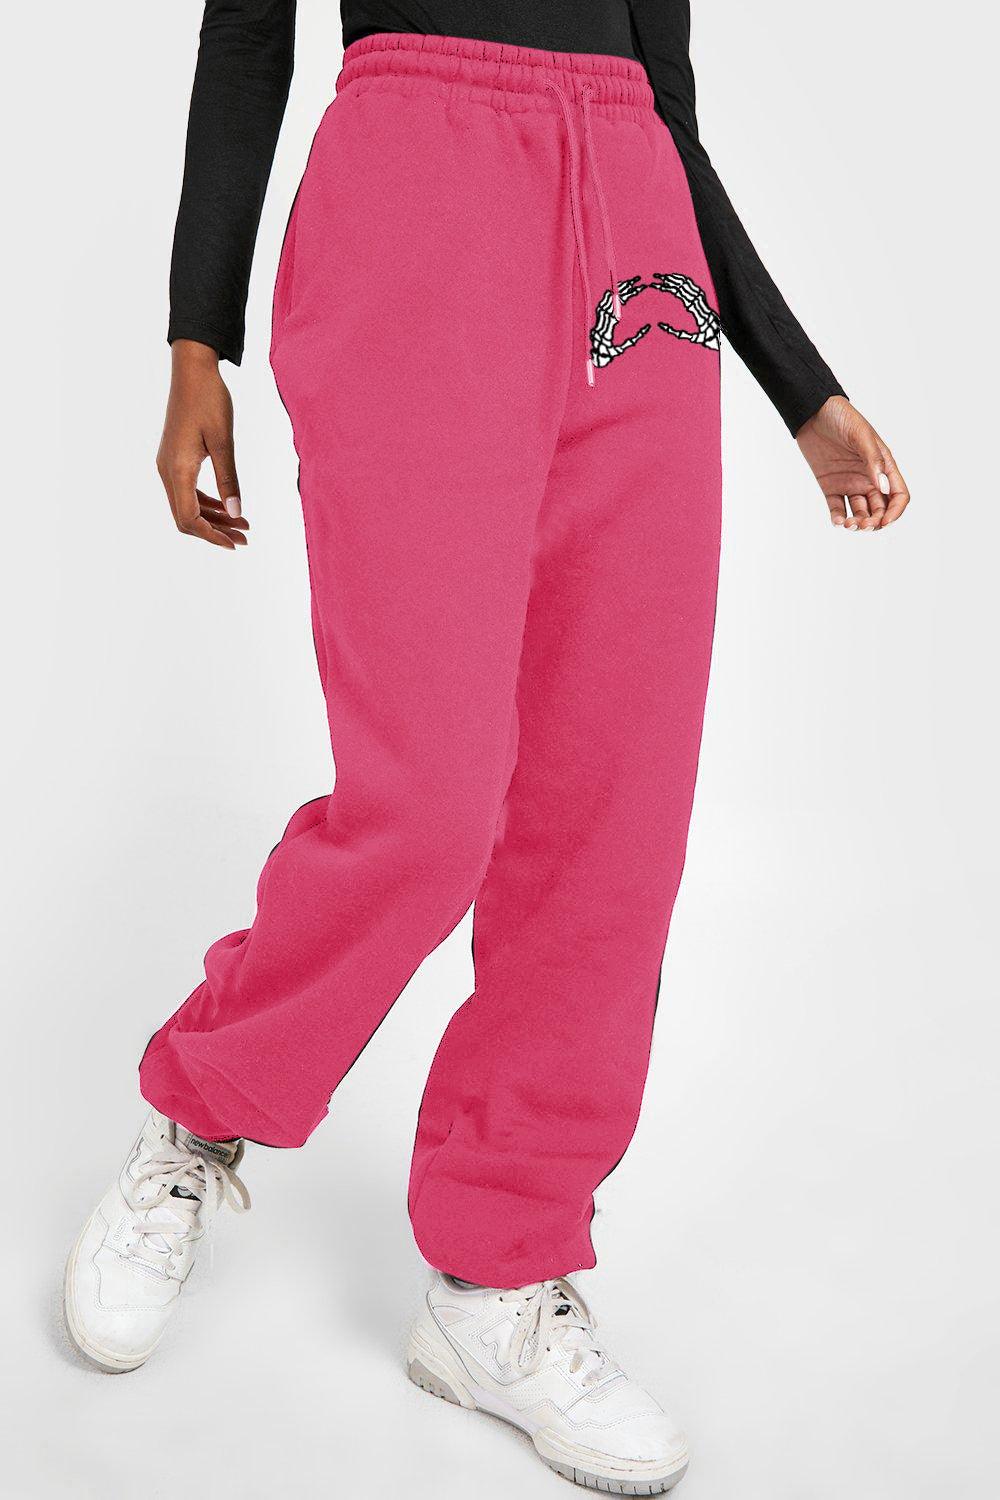 Simply Love Full Size Skeleton Hands Graphic Sweatpants - Lab Fashion, Home & Health